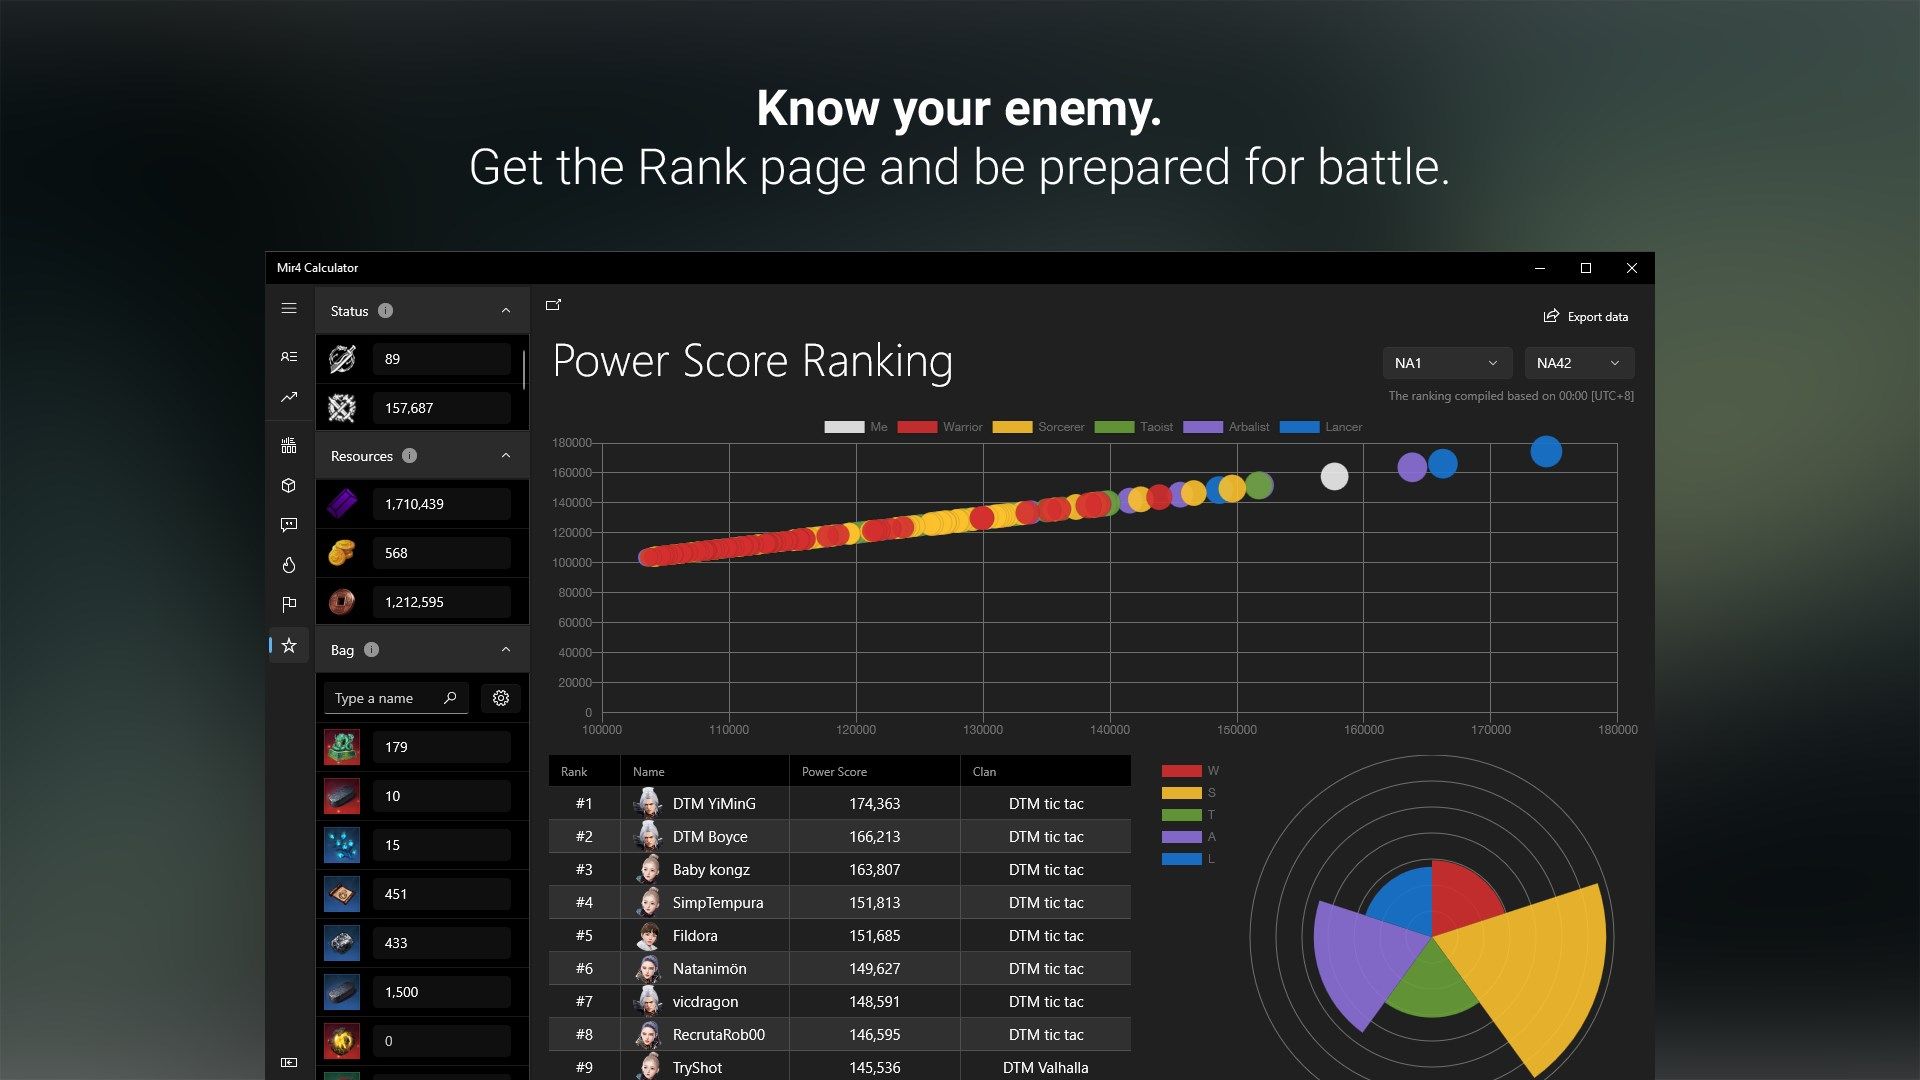 Mir4 Calculator | Know your enemy. Get the Rank page and be prepared for battle.